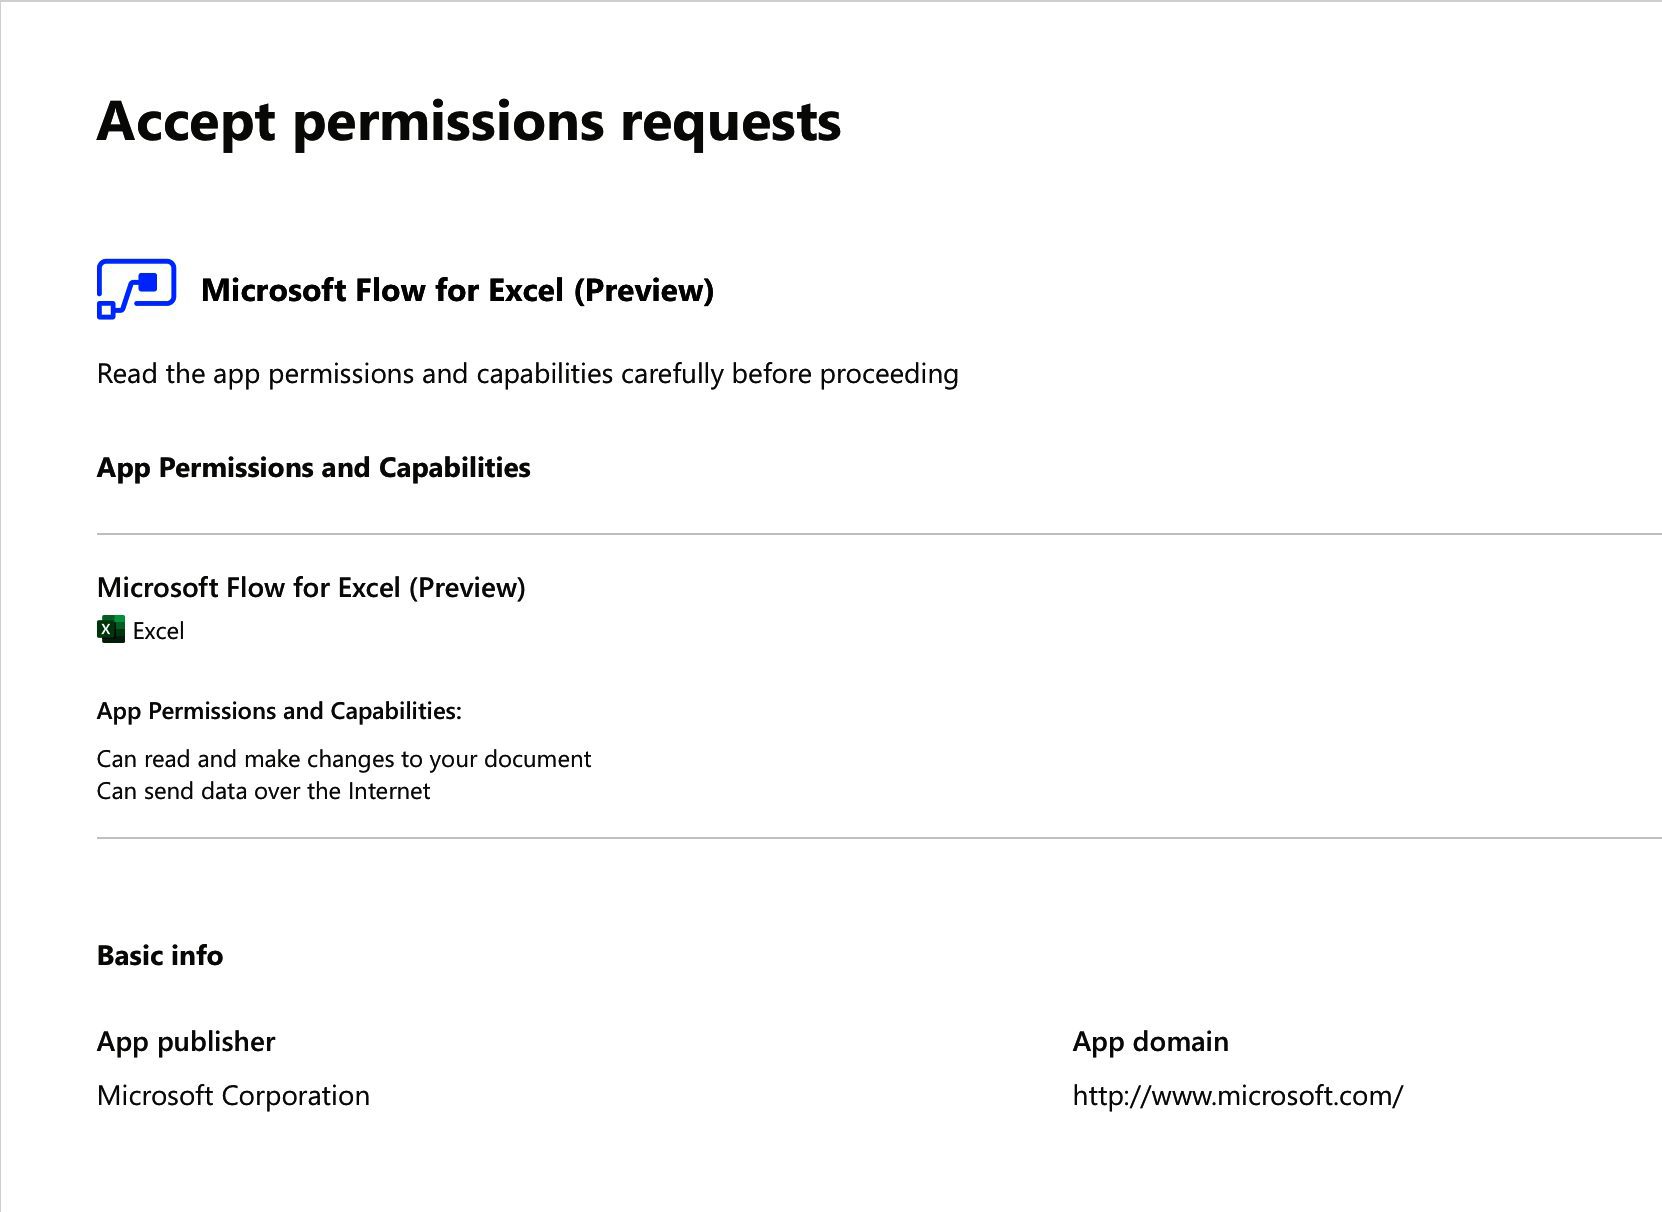 After the permissions were selected Microsoft prompts for additional permissions for the Microsoft Flow for Excel add-in